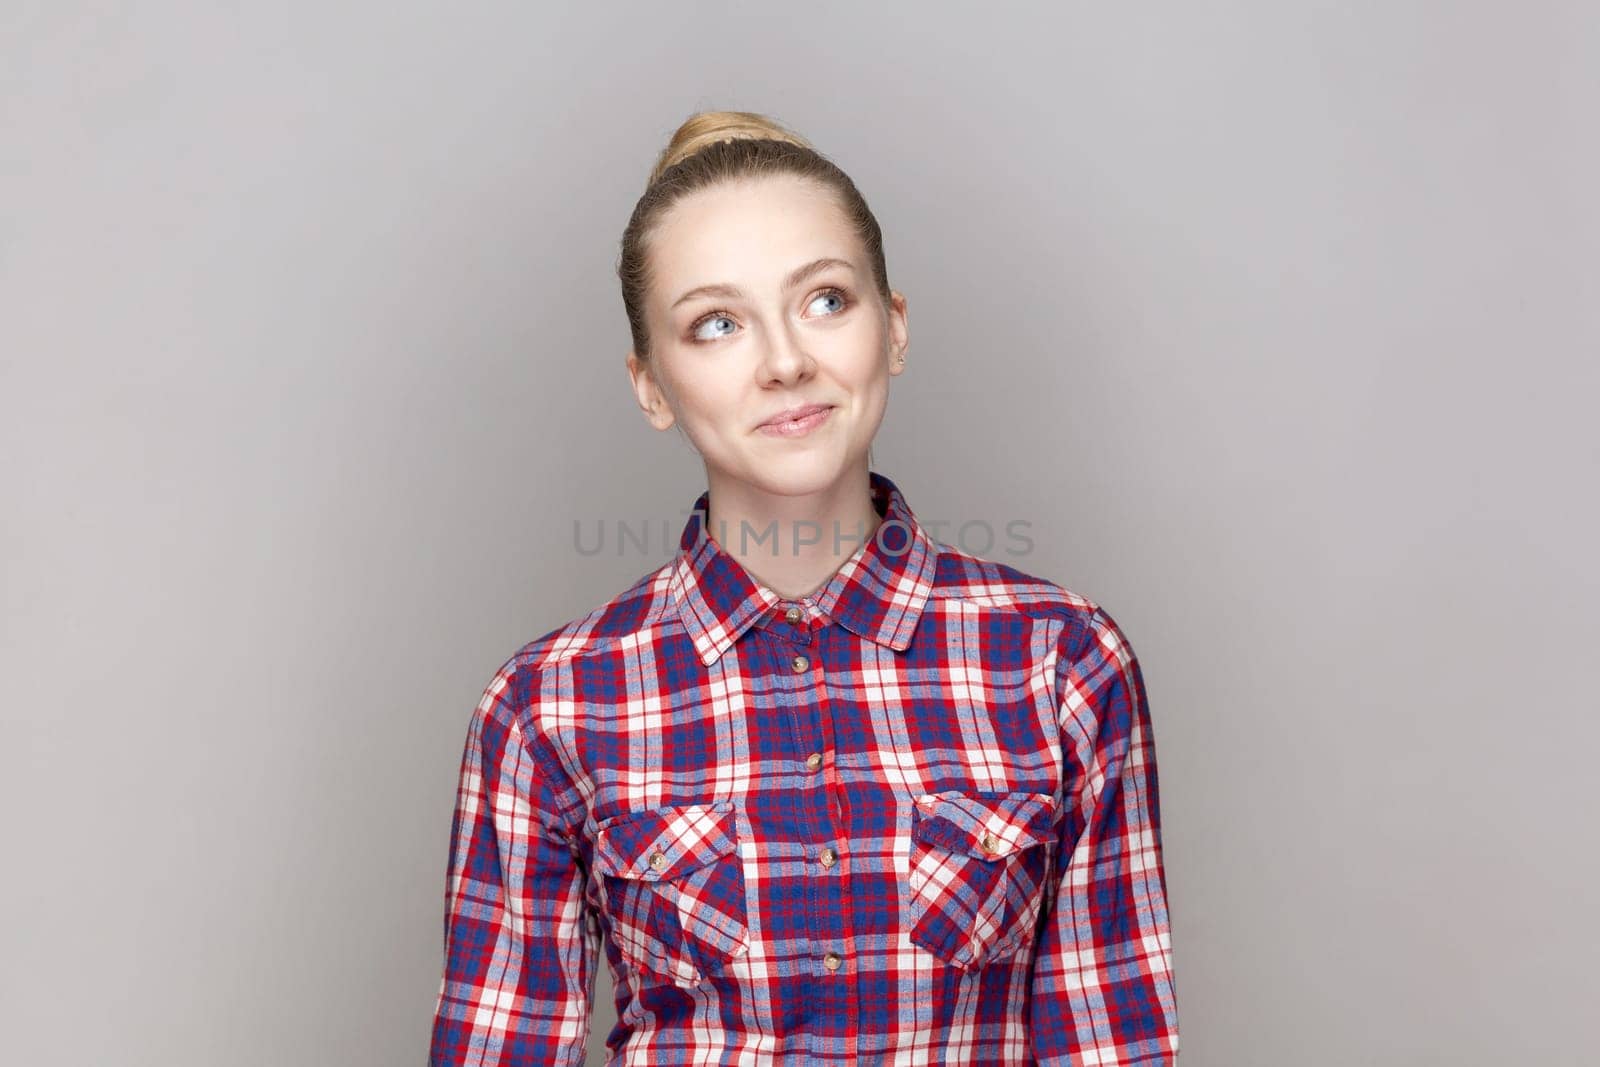 Portrait of positive smiling adorable woman with bun hairstyle looking away, thinking about future, dreaming, wearing checkered shirt. Indoor studio shot isolated on gray background.